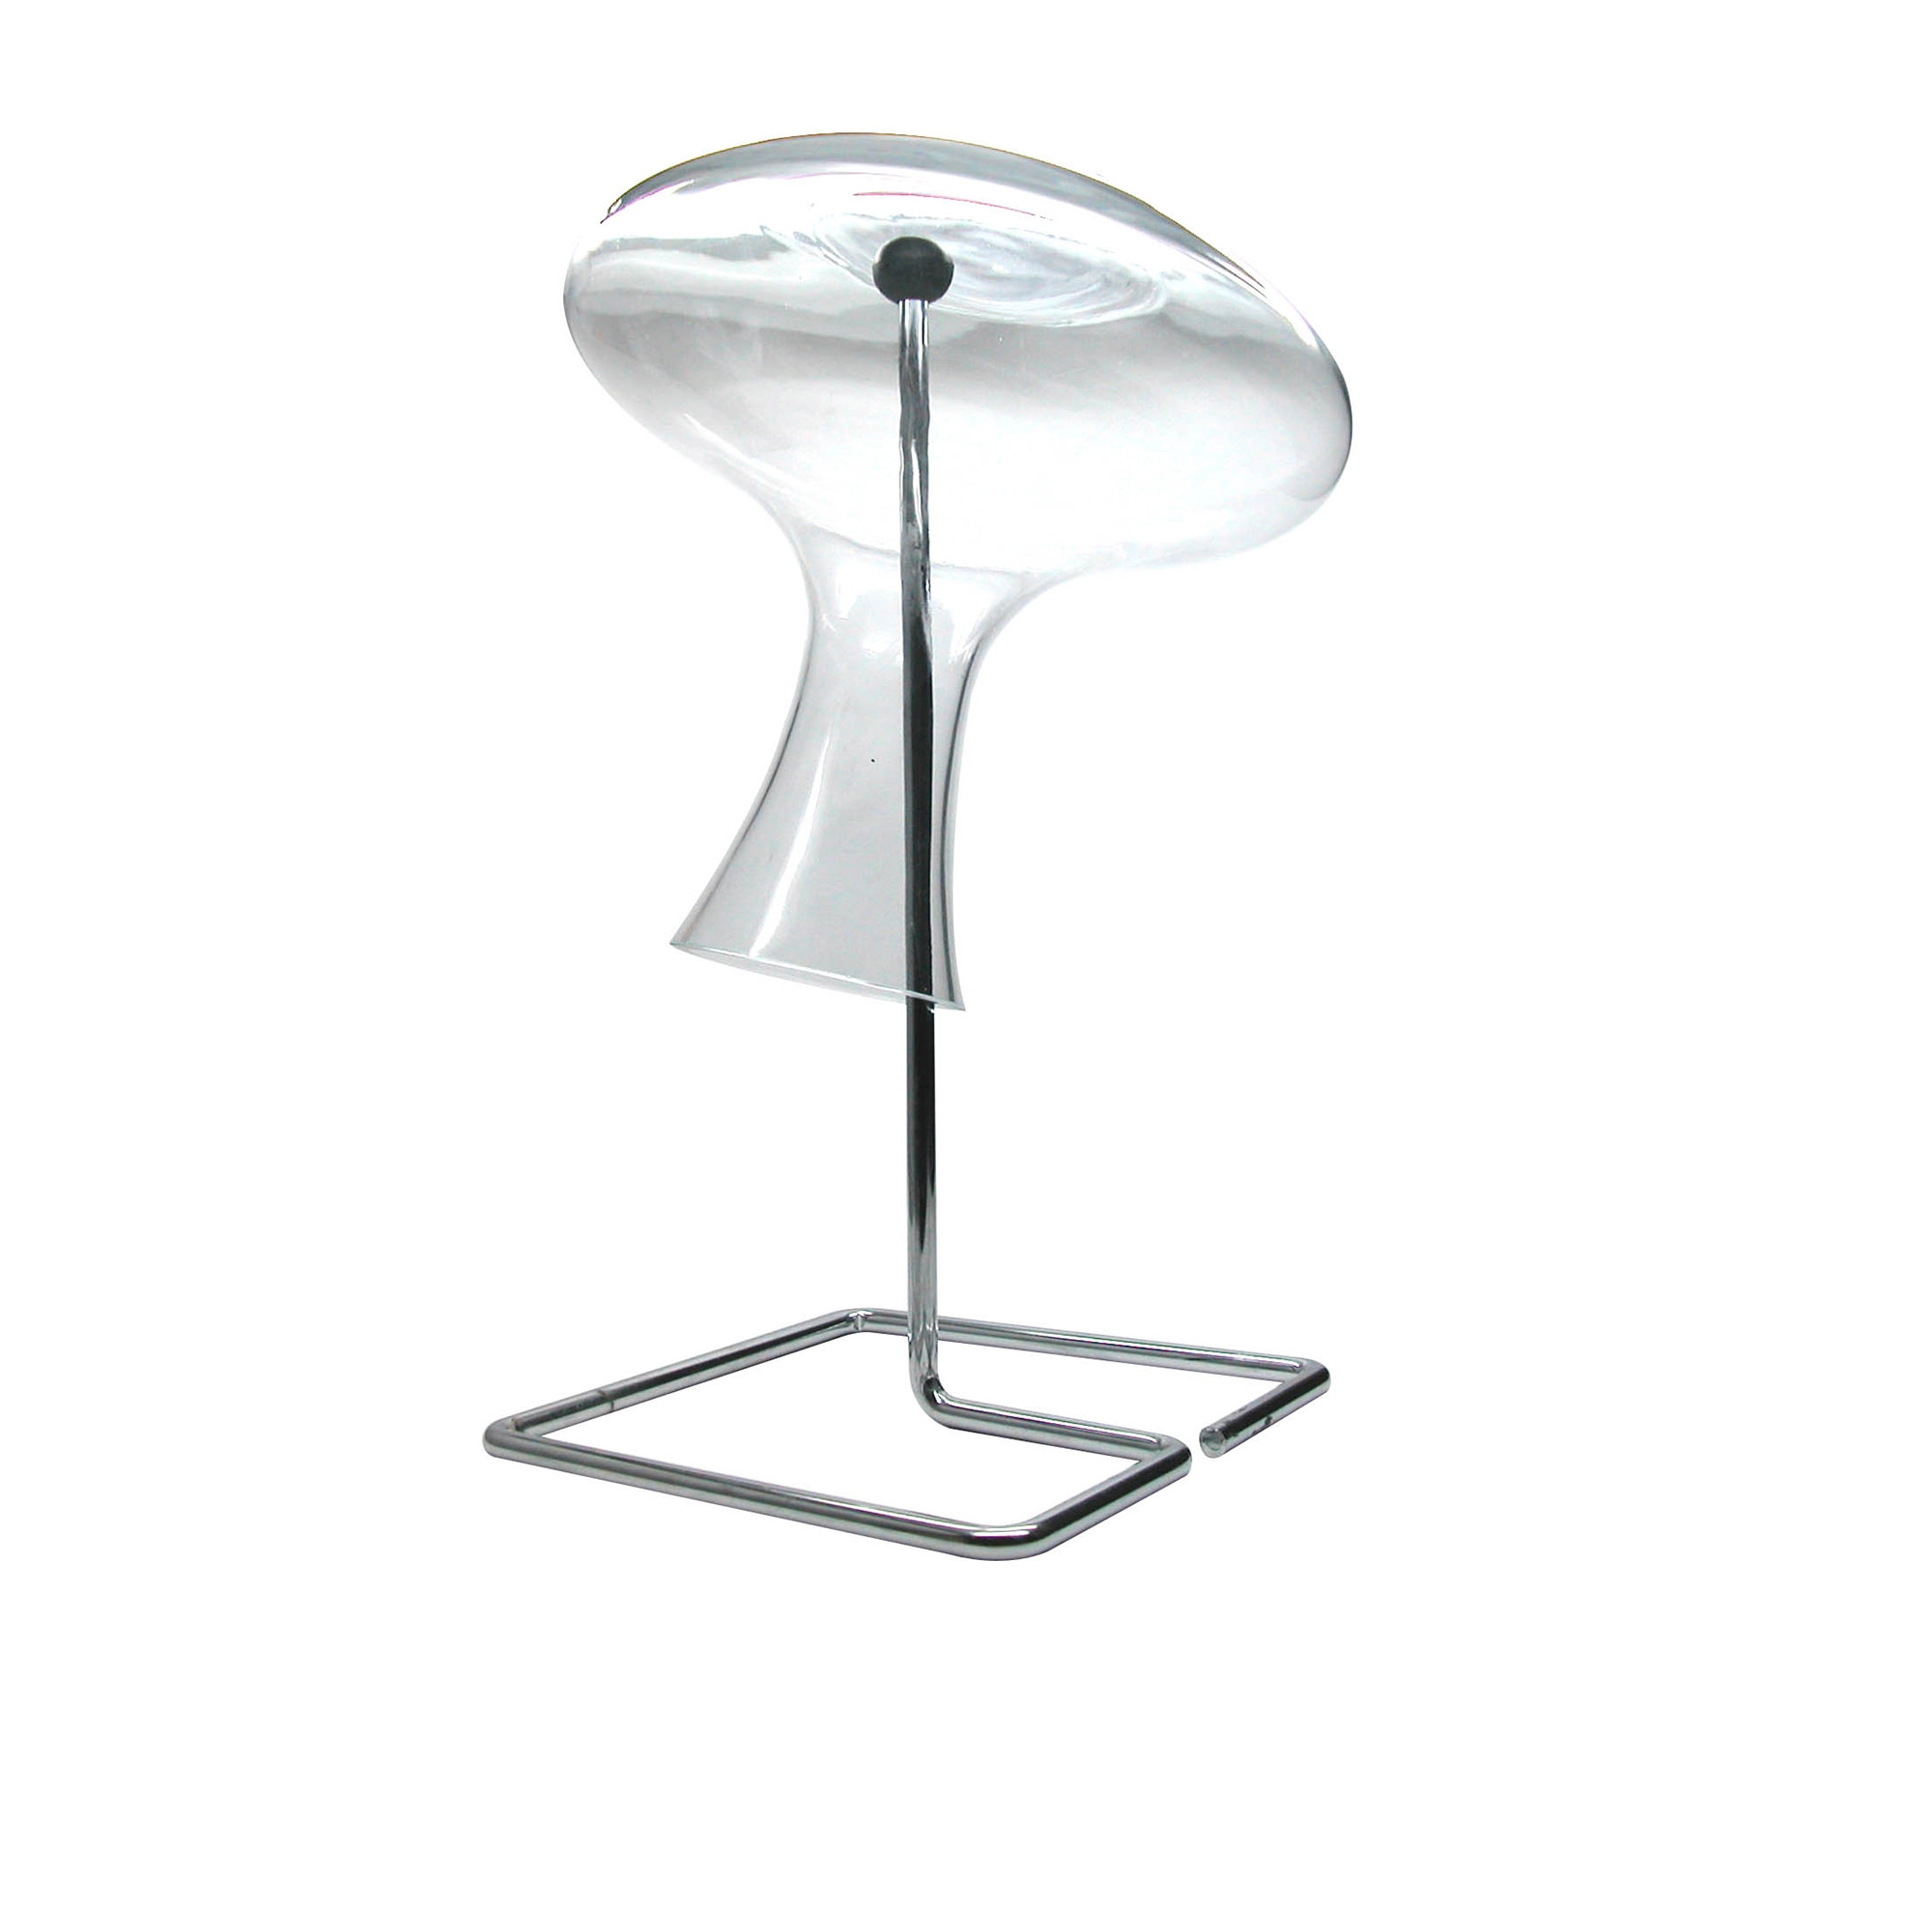 Winex Decanter Drying Stand Image 2